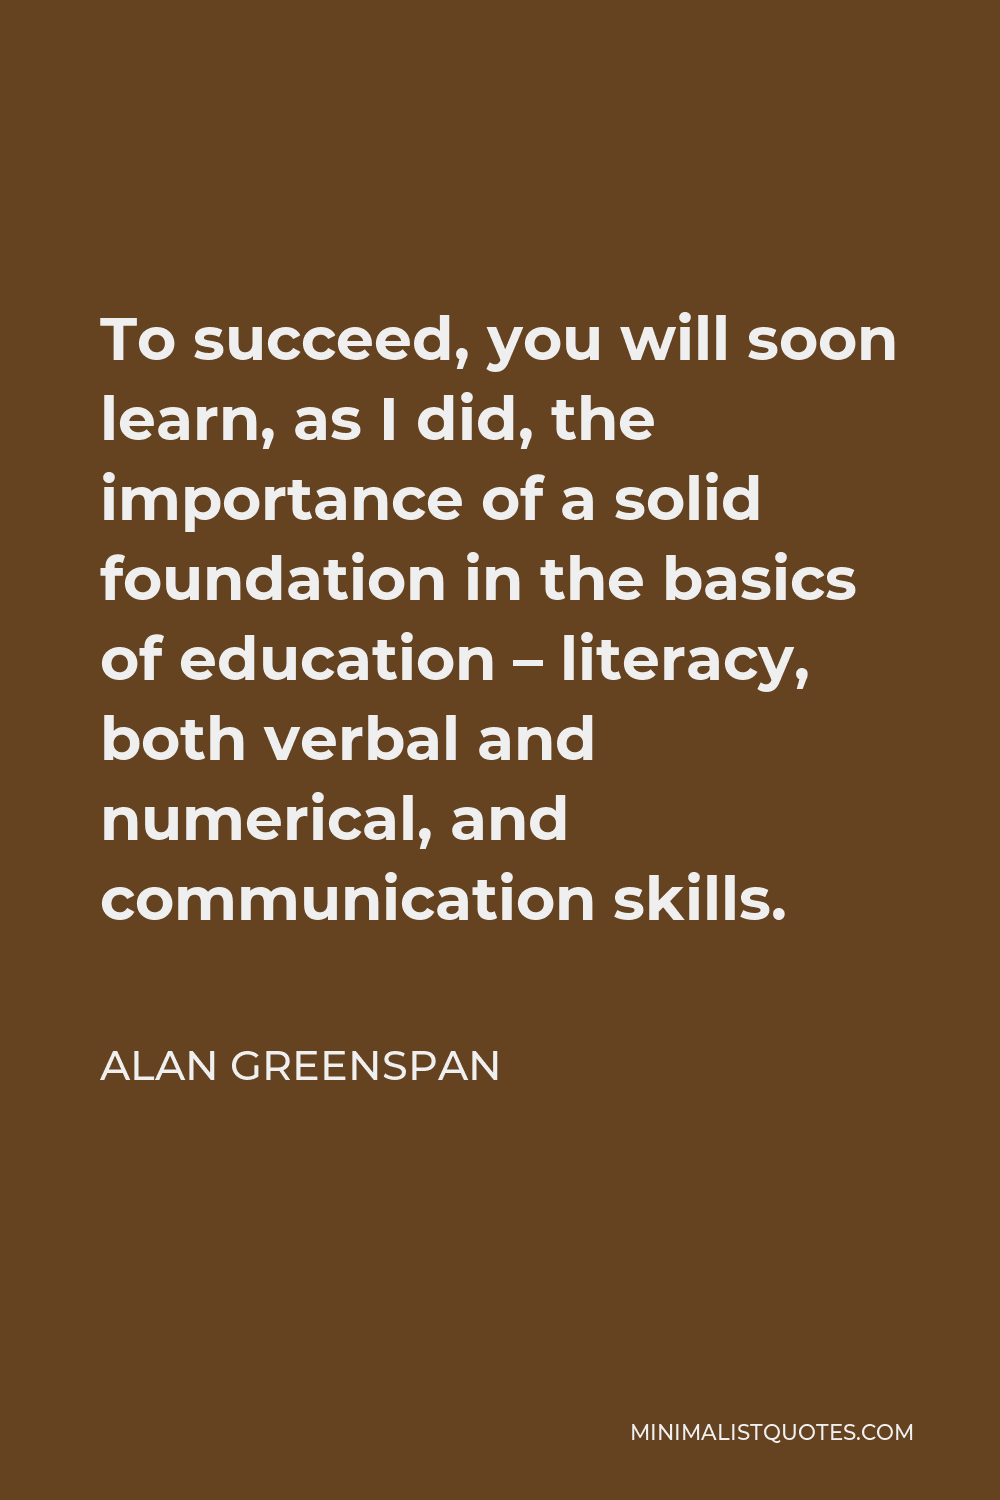 Alan Greenspan Quote - To succeed, you will soon learn, as I did, the importance of a solid foundation in the basics of education – literacy, both verbal and numerical, and communication skills.